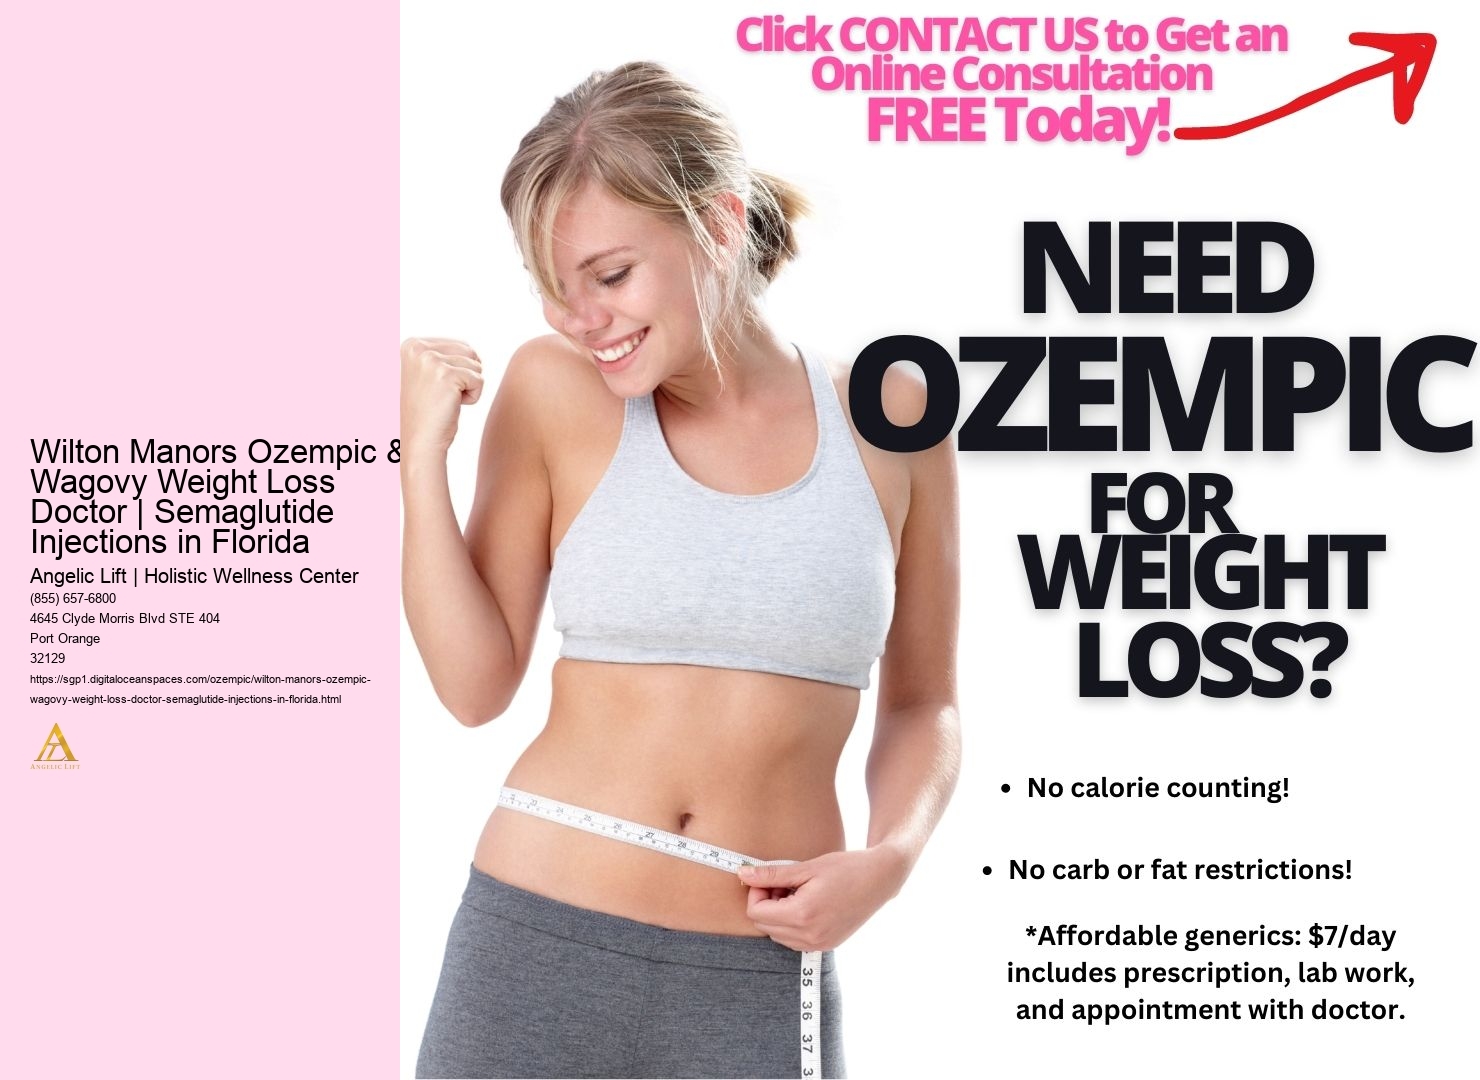 Wilton Manors Ozempic & Wagovy Weight Loss Doctor | Semaglutide Injections in Florida